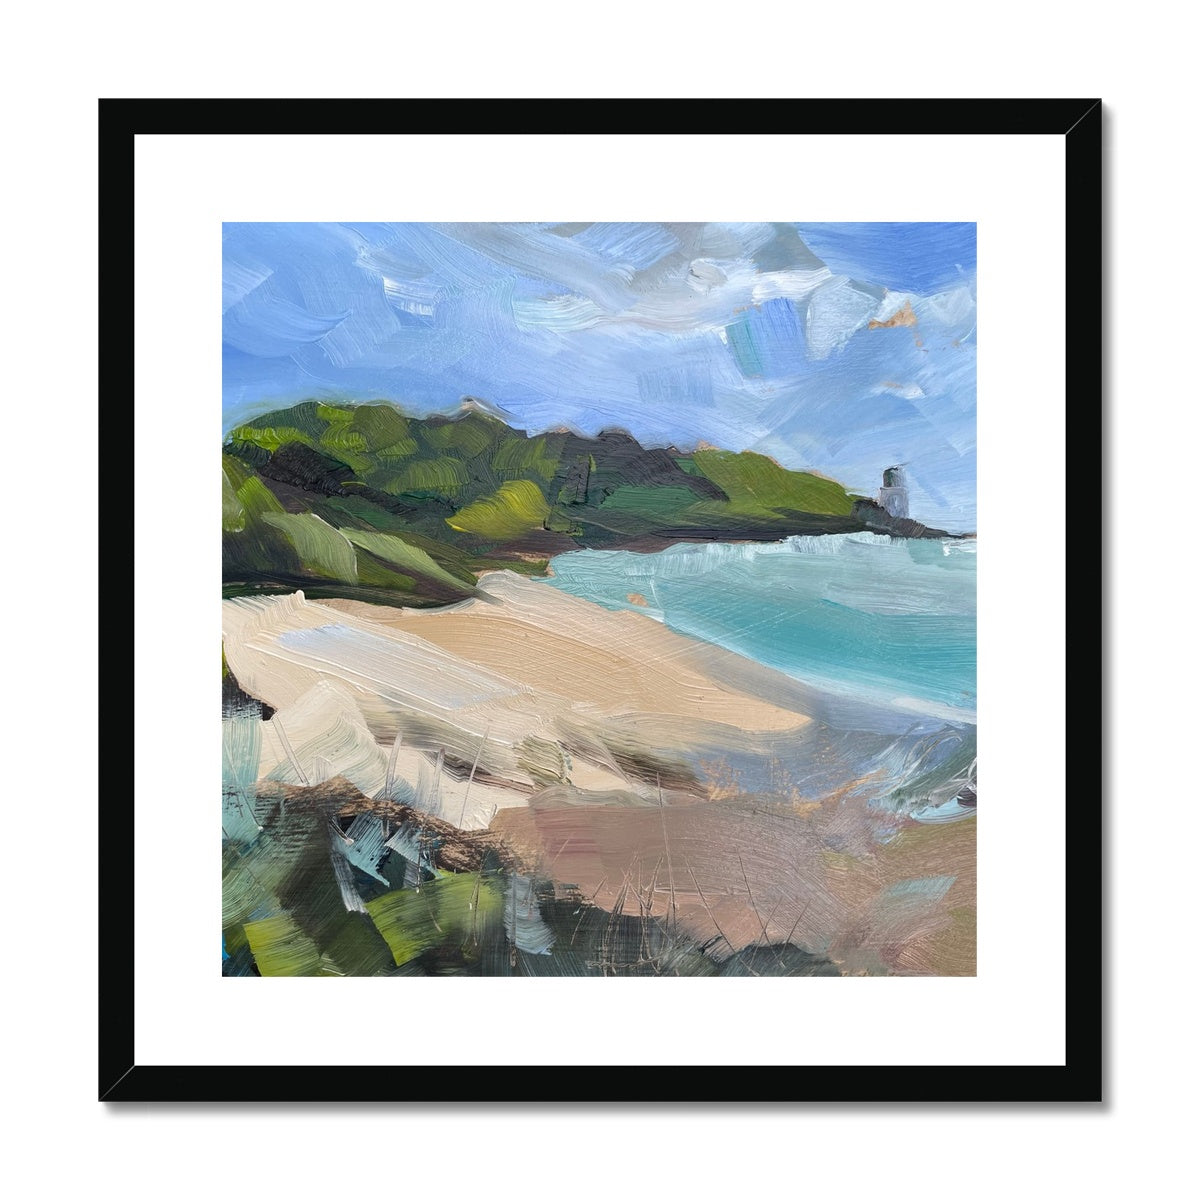 St Anthony's Head, Cornwall Framed & Mounted Print